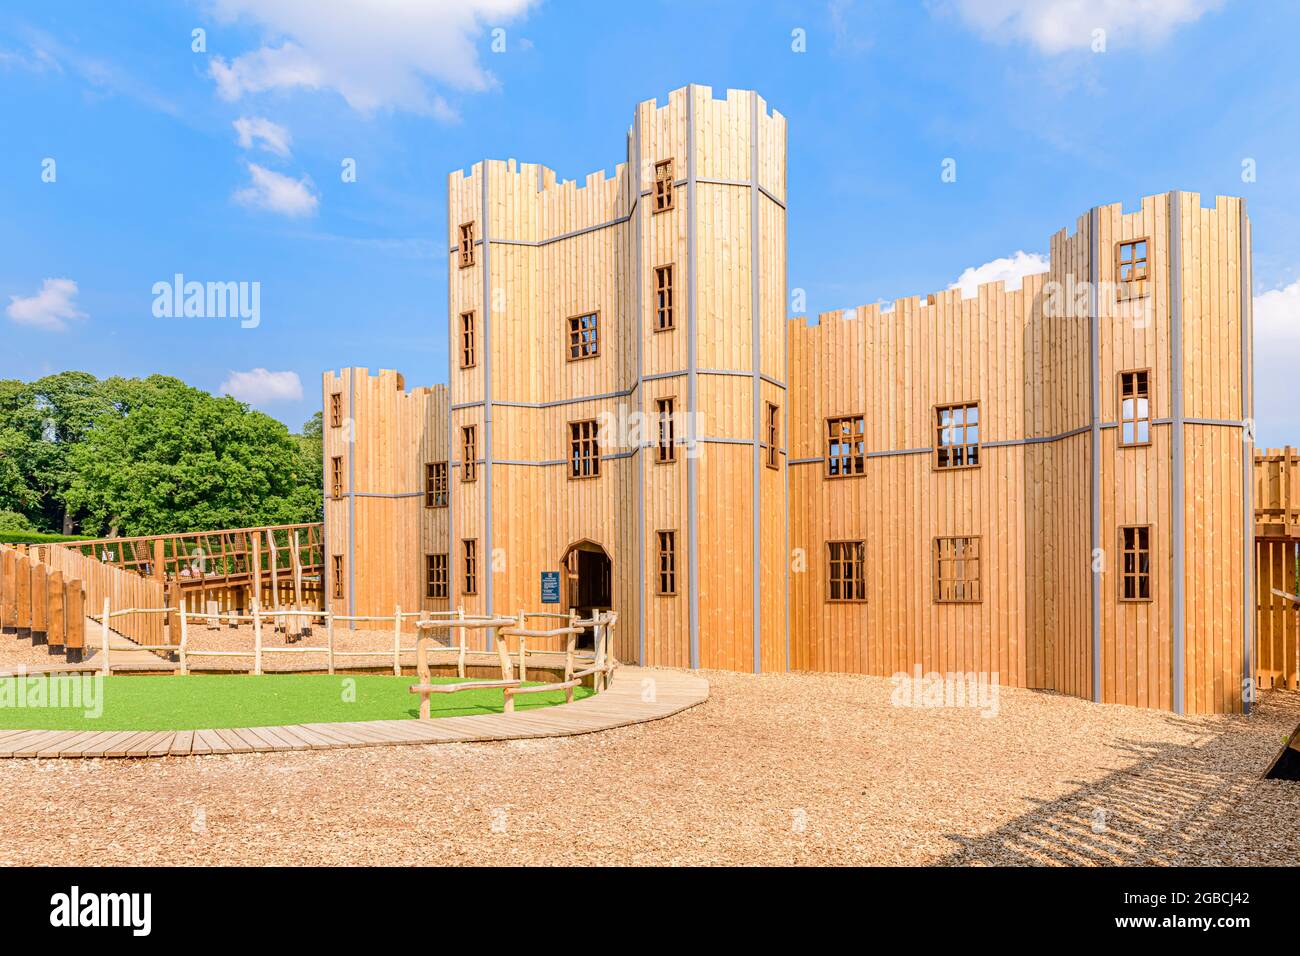 the knights stronghold, a magnificent wooden adventure play castle structure for children at leeds castle kent England Stock Photo